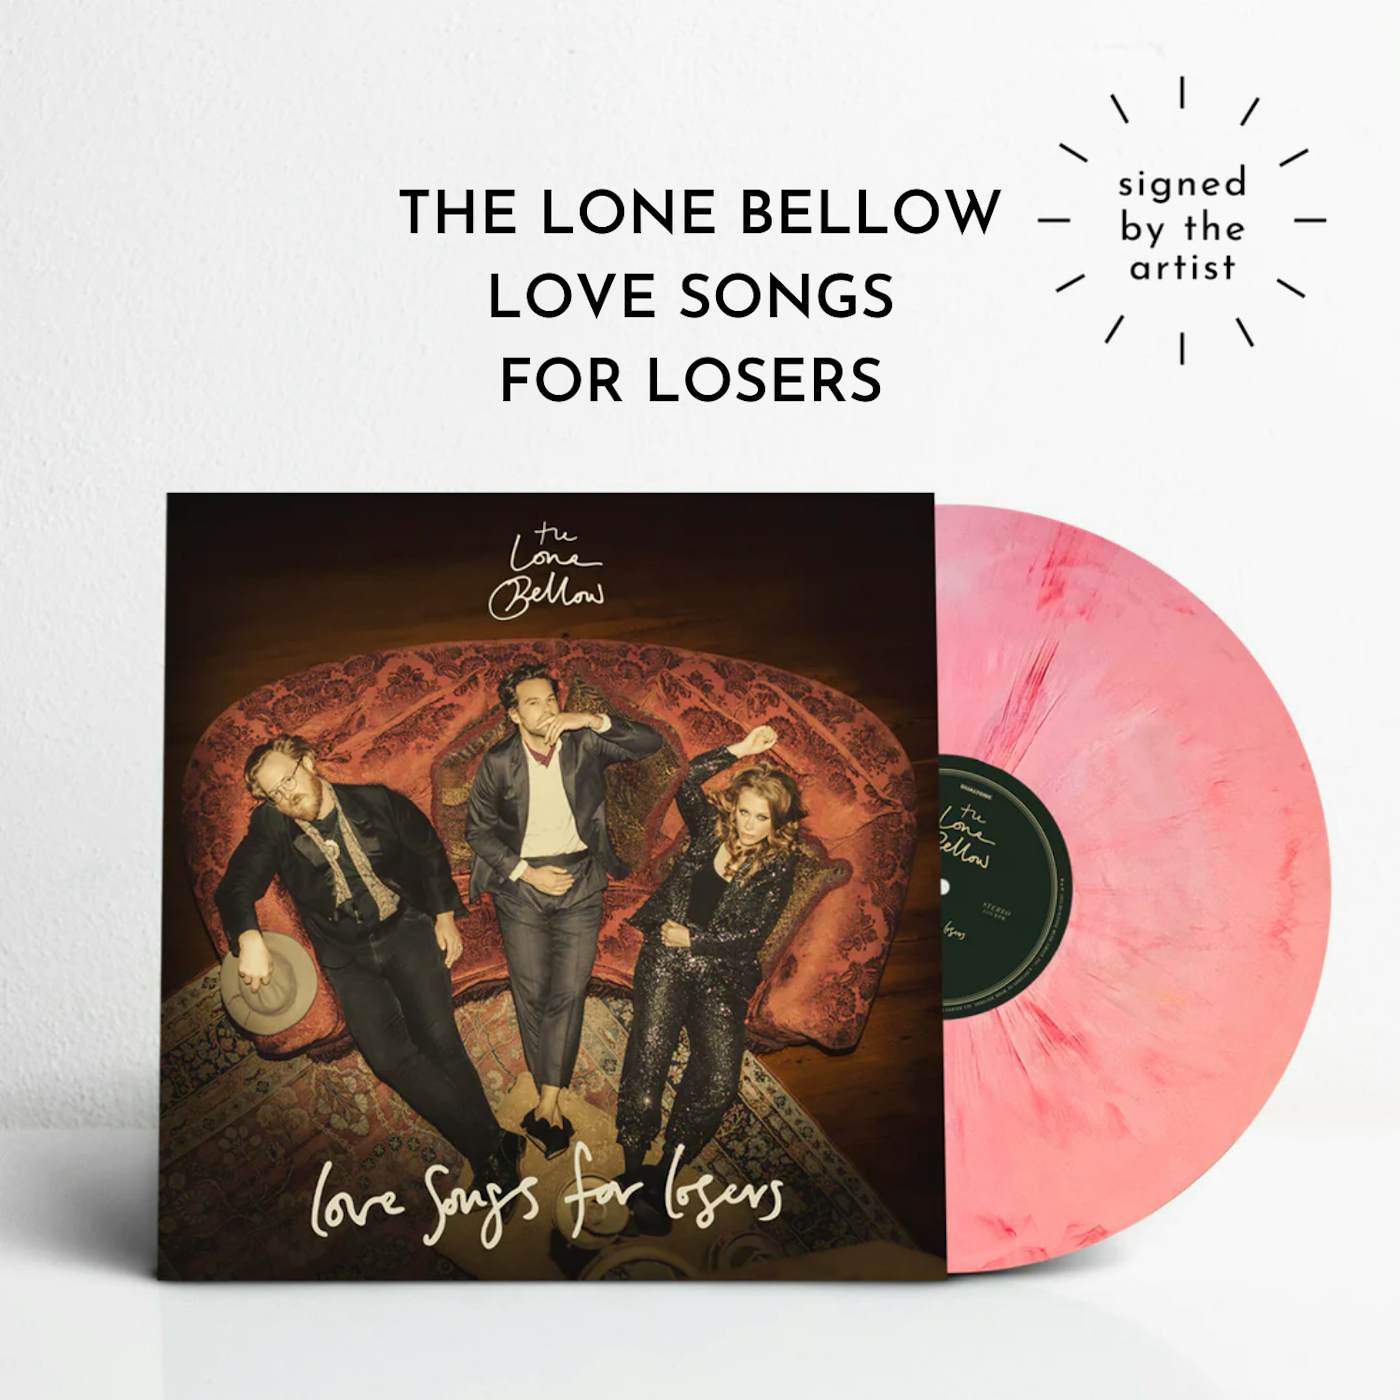 The Lone Bellow Love Songs for Losers (Signed Ltd. Edition Vinyl)